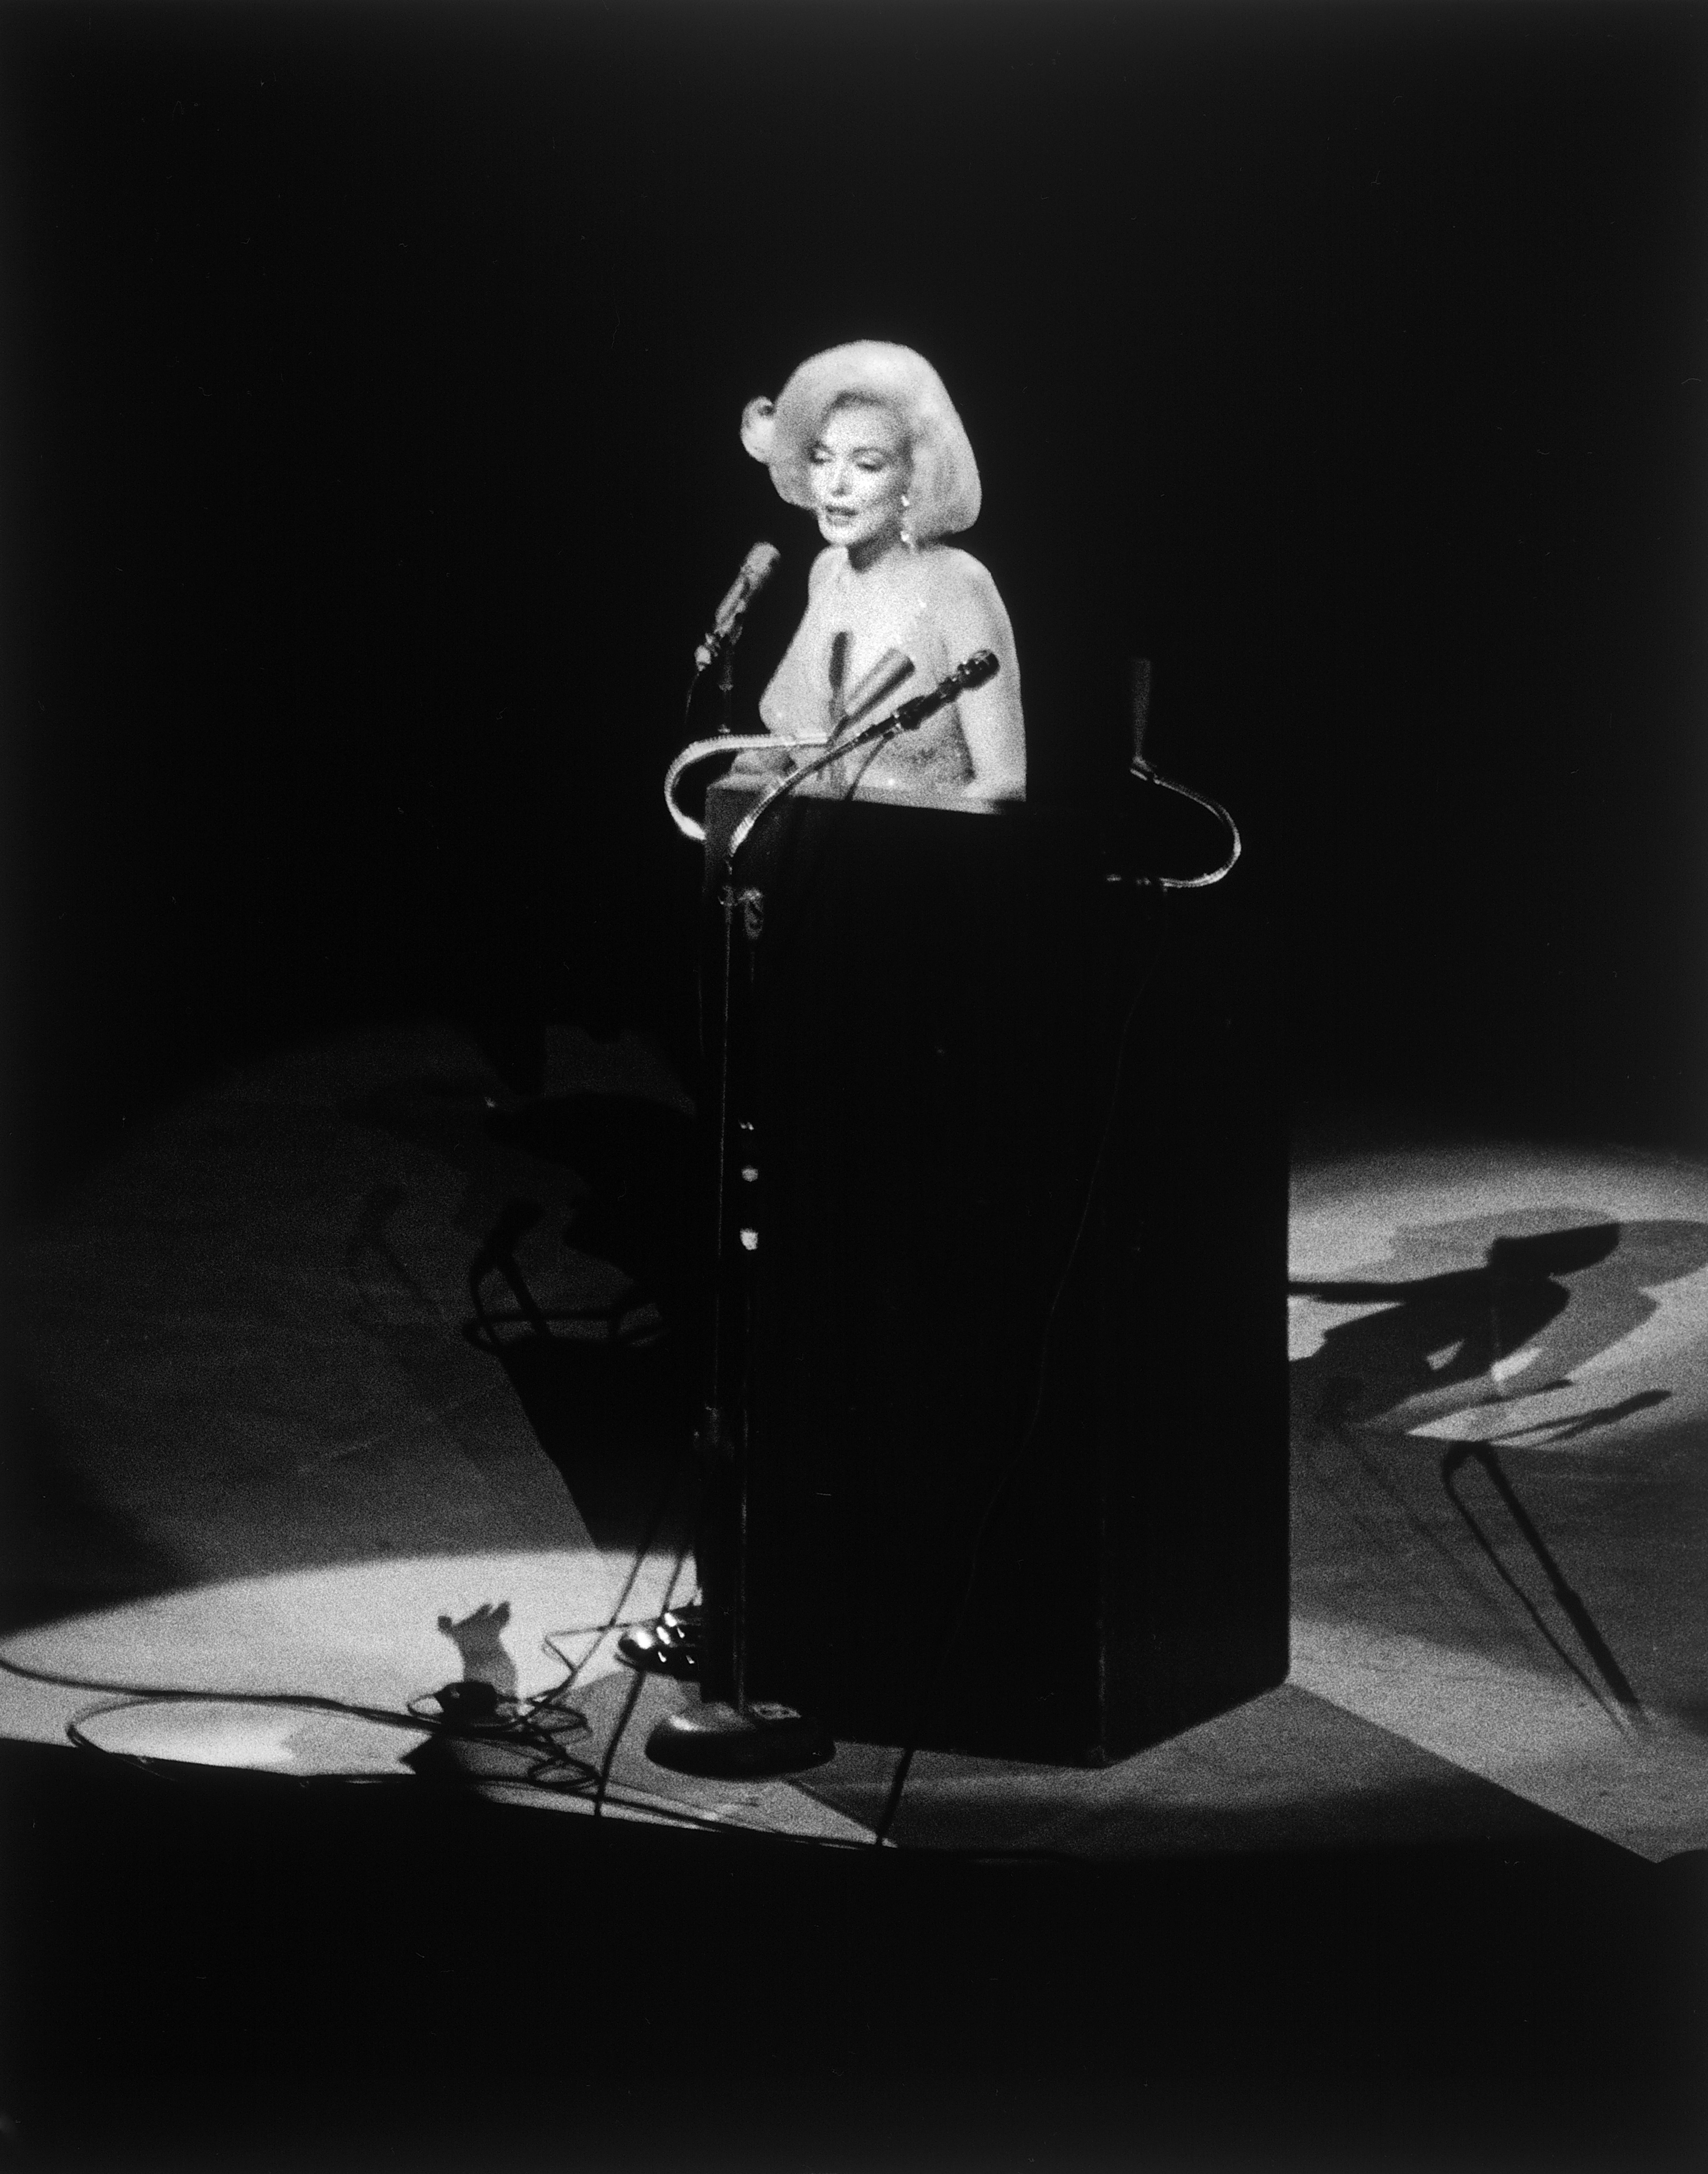 Monroe's famous rendition of  Happy Birthday,  which she sang to President John F. Kennedy at Madison Square Garden on May 19, 1962.